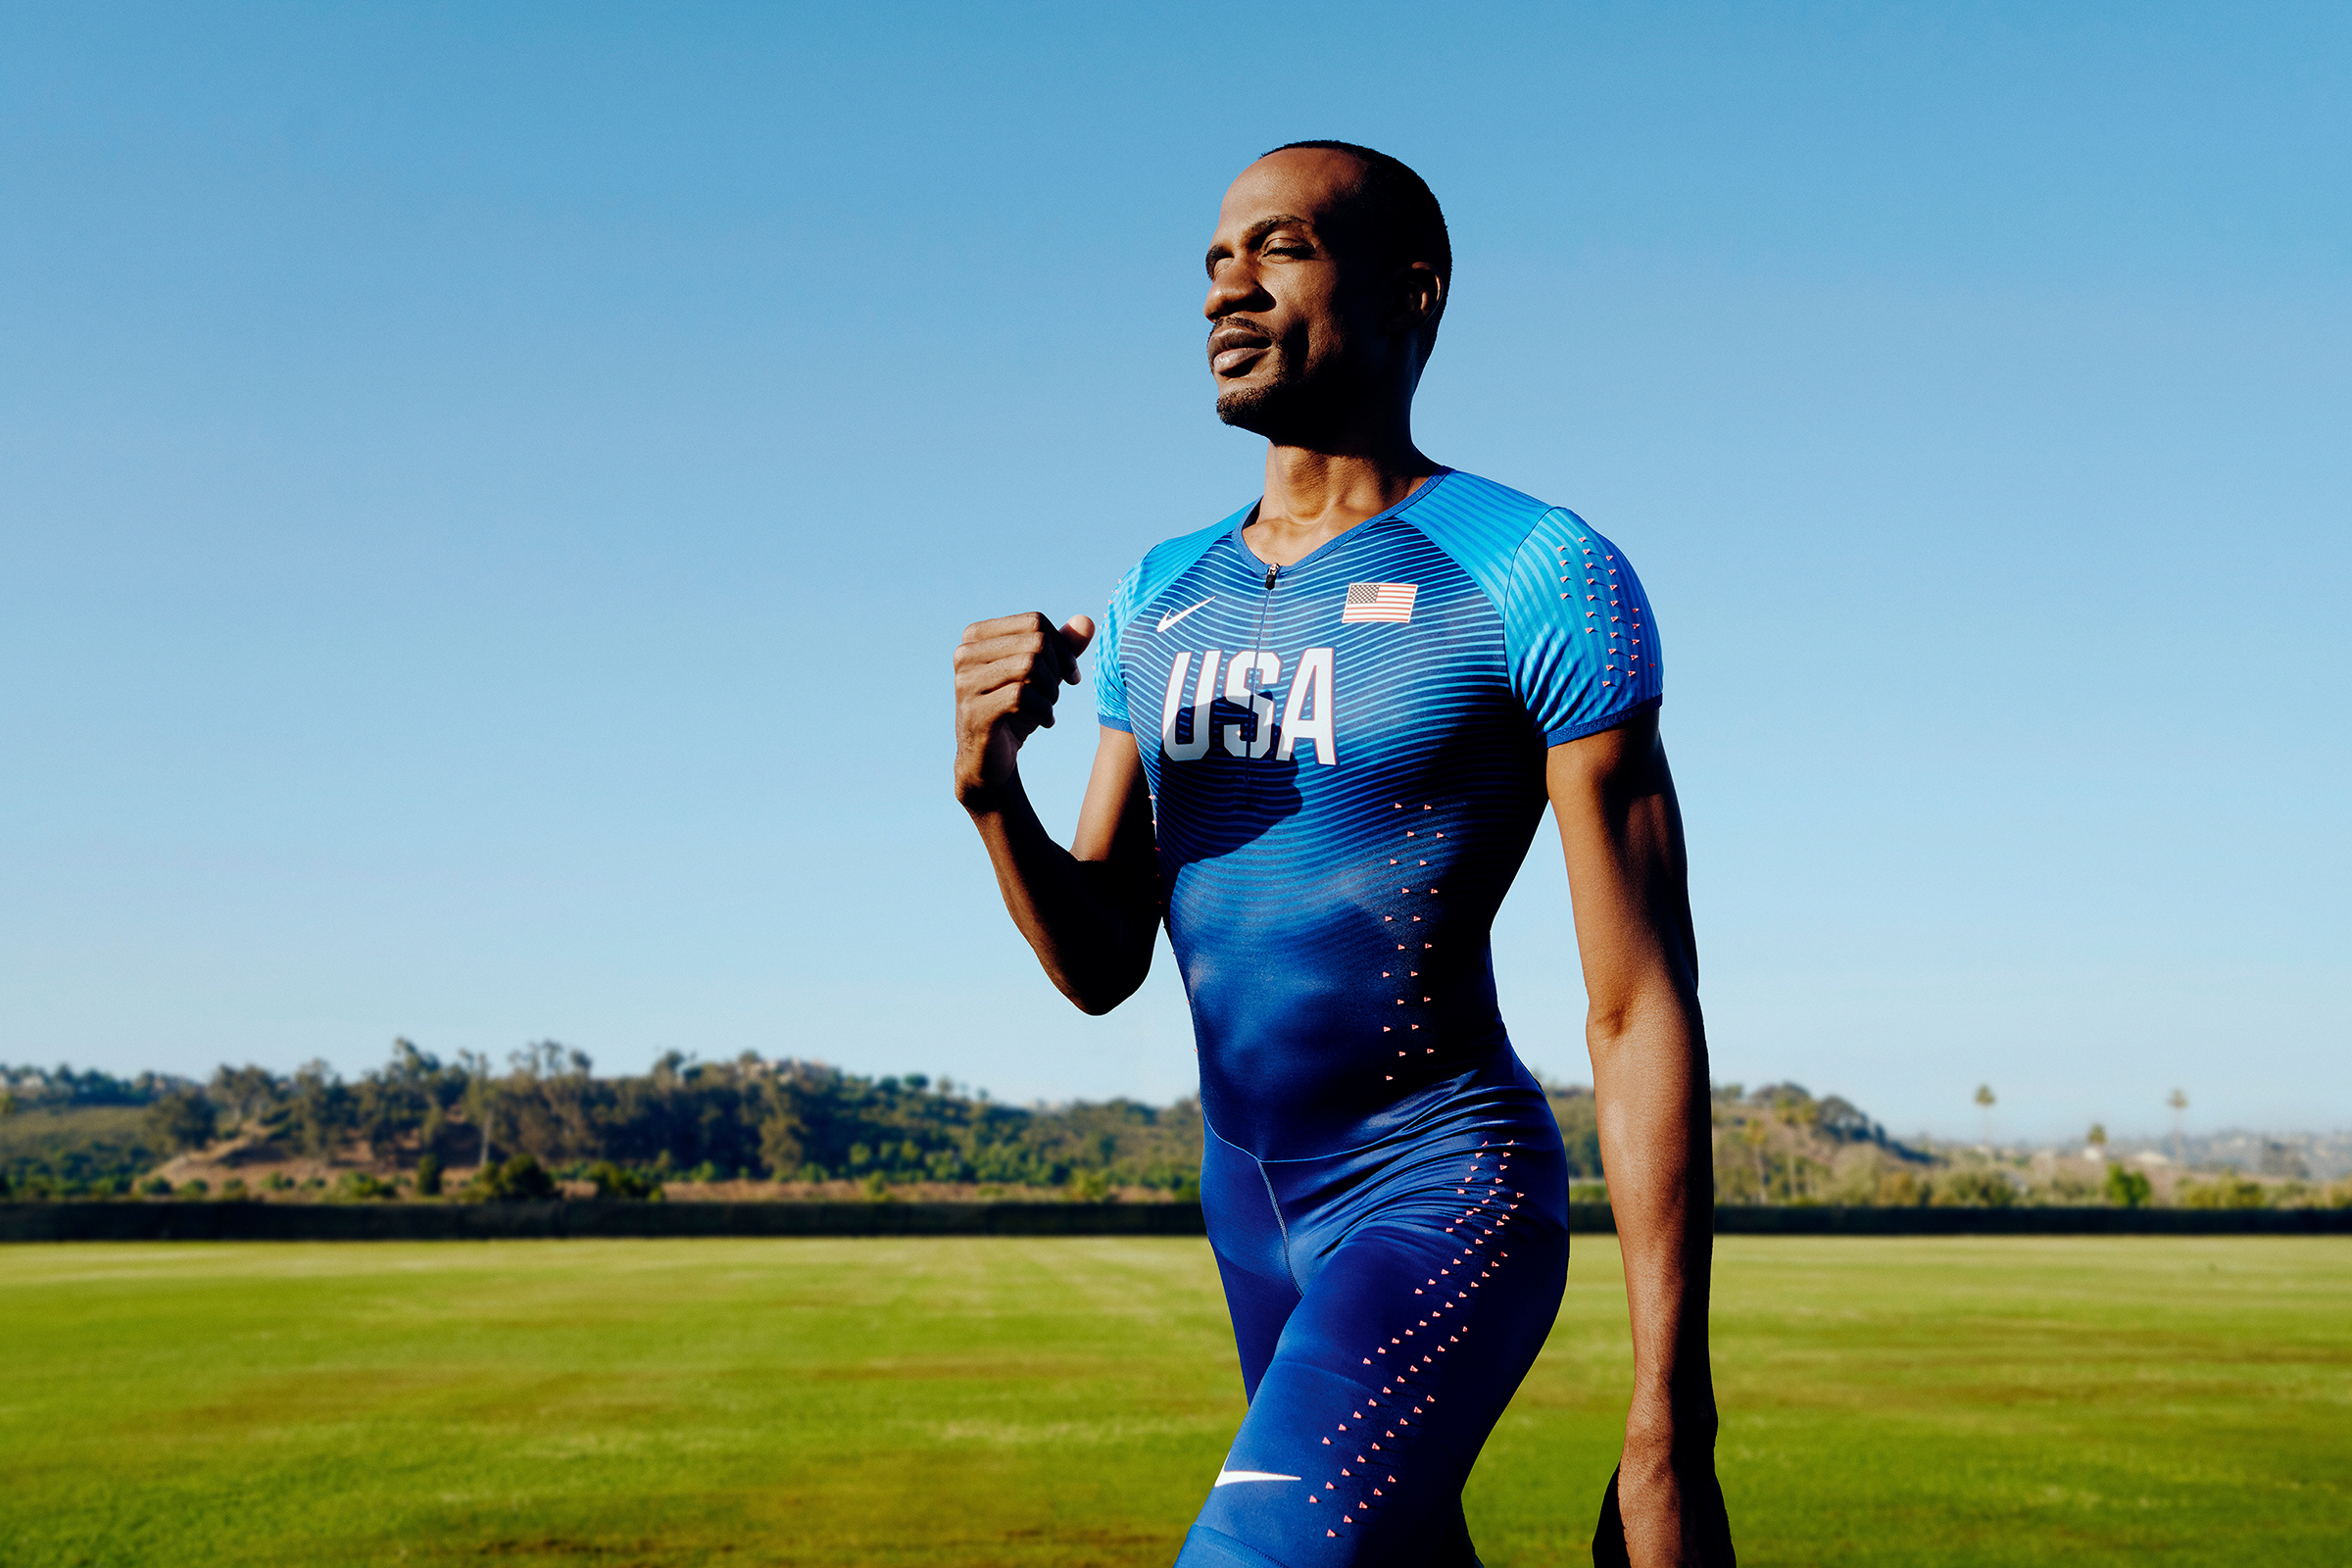 Lex Gillette walking on a track loop wearing an all blue track outfit and a green field behind him.